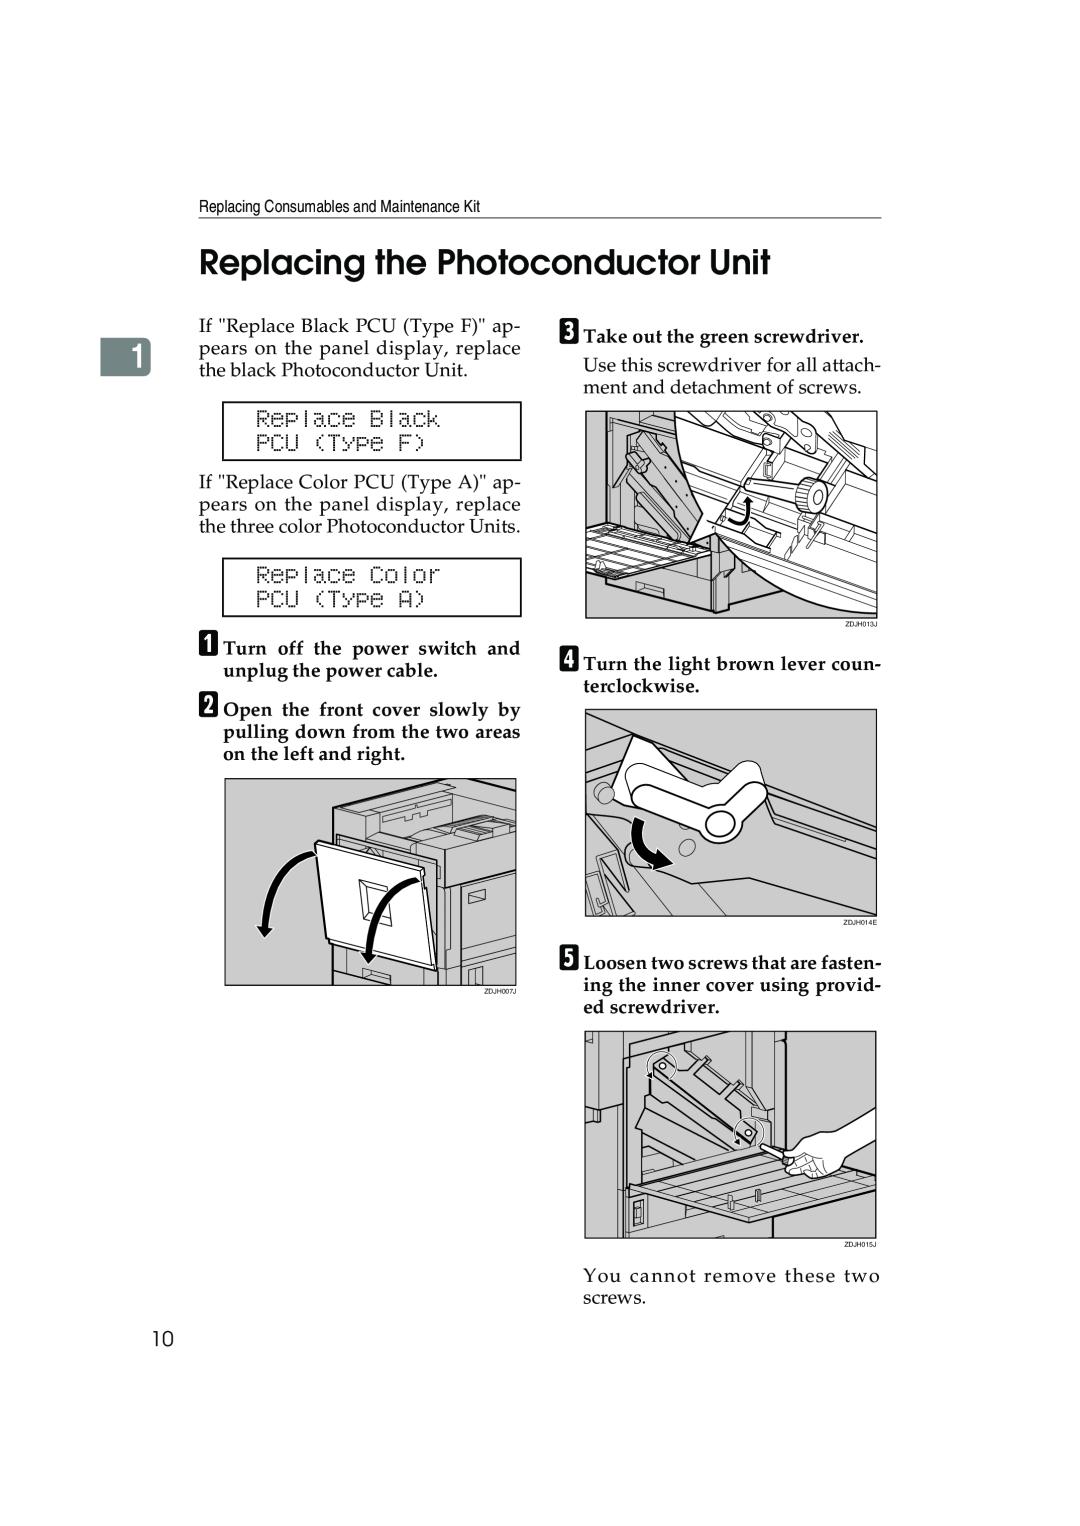 Ricoh AP3800C operating instructions Replacing the Photoconductor Unit, Replace Black PCU Type F, Replace Color PCU Type A 